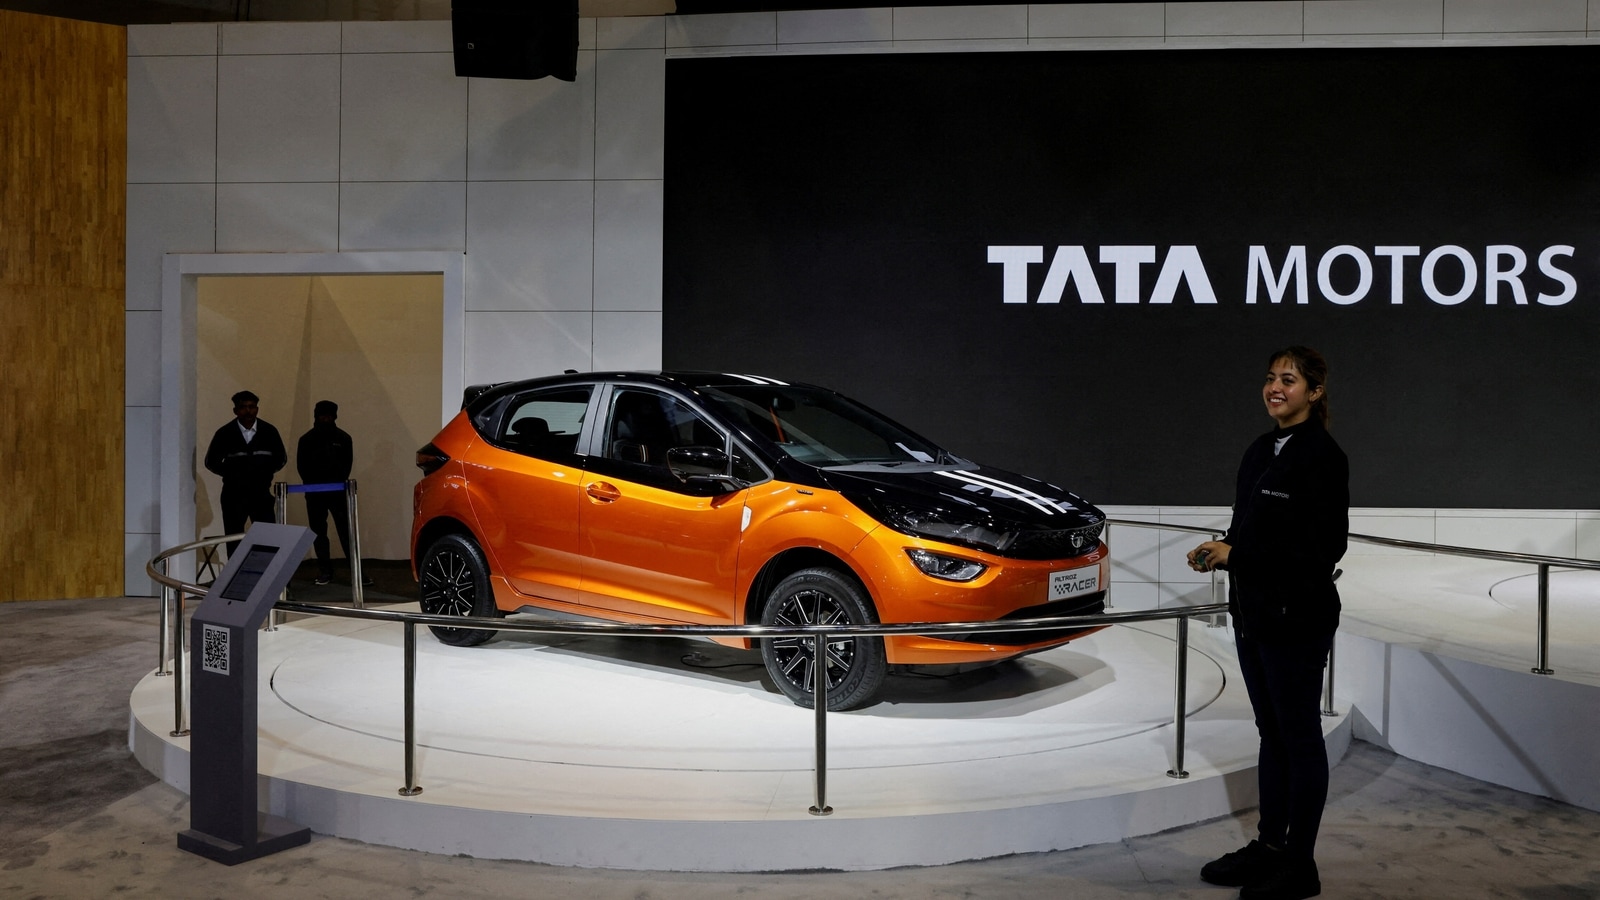 Planning to buy a new car? Tata Motors to hike prices up to 2% from this date - Hindustan Times